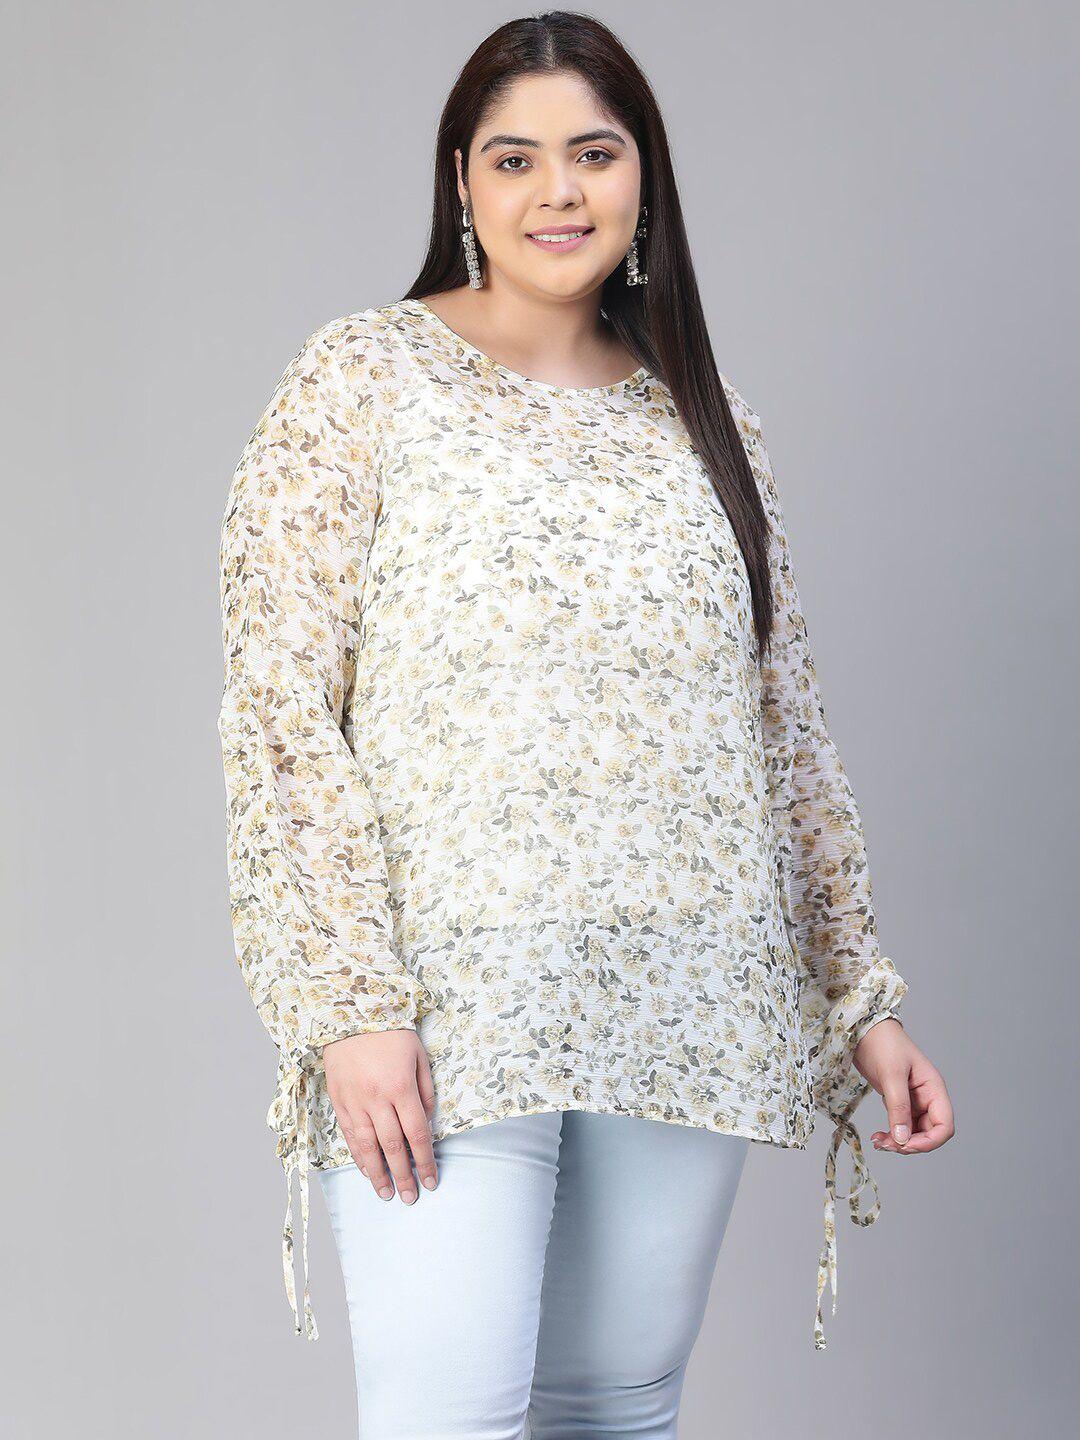 oxolloxo-plus-size-floral-printed-bell-sleeve-chiffon-top